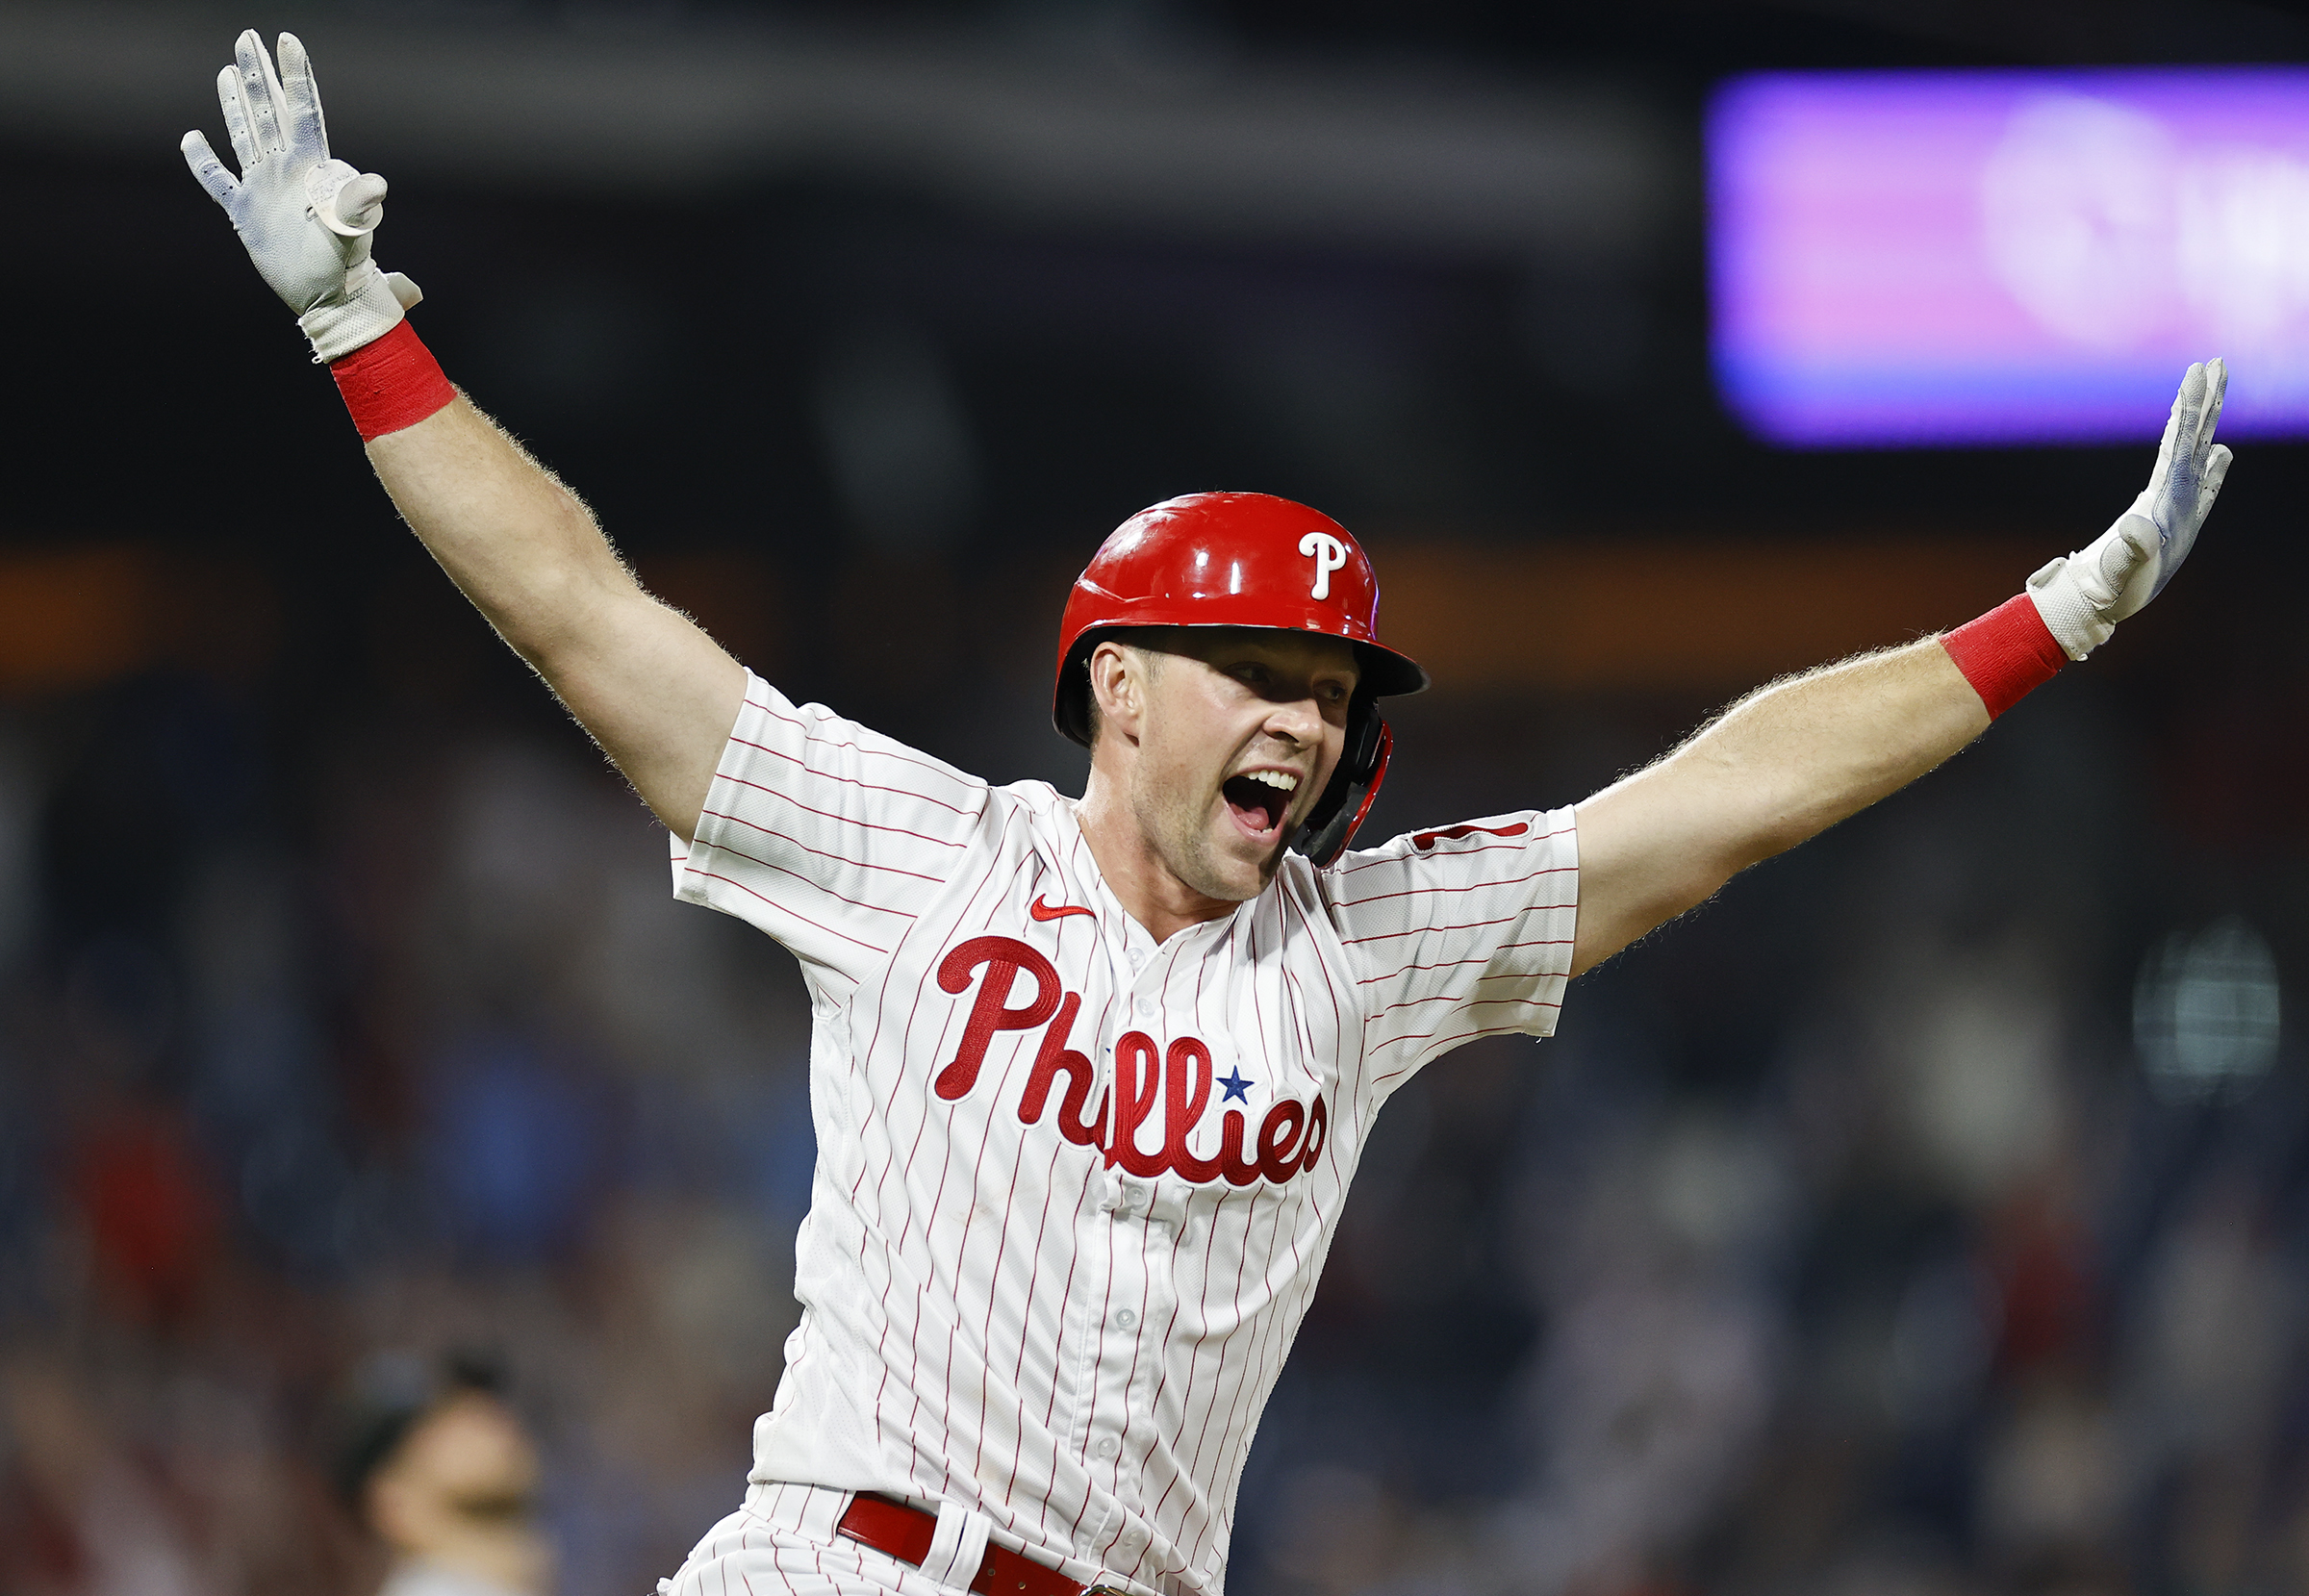 Rhys Hoskins' time to shine as his walk-off double gives Phillies a 3-2 win  over Miami